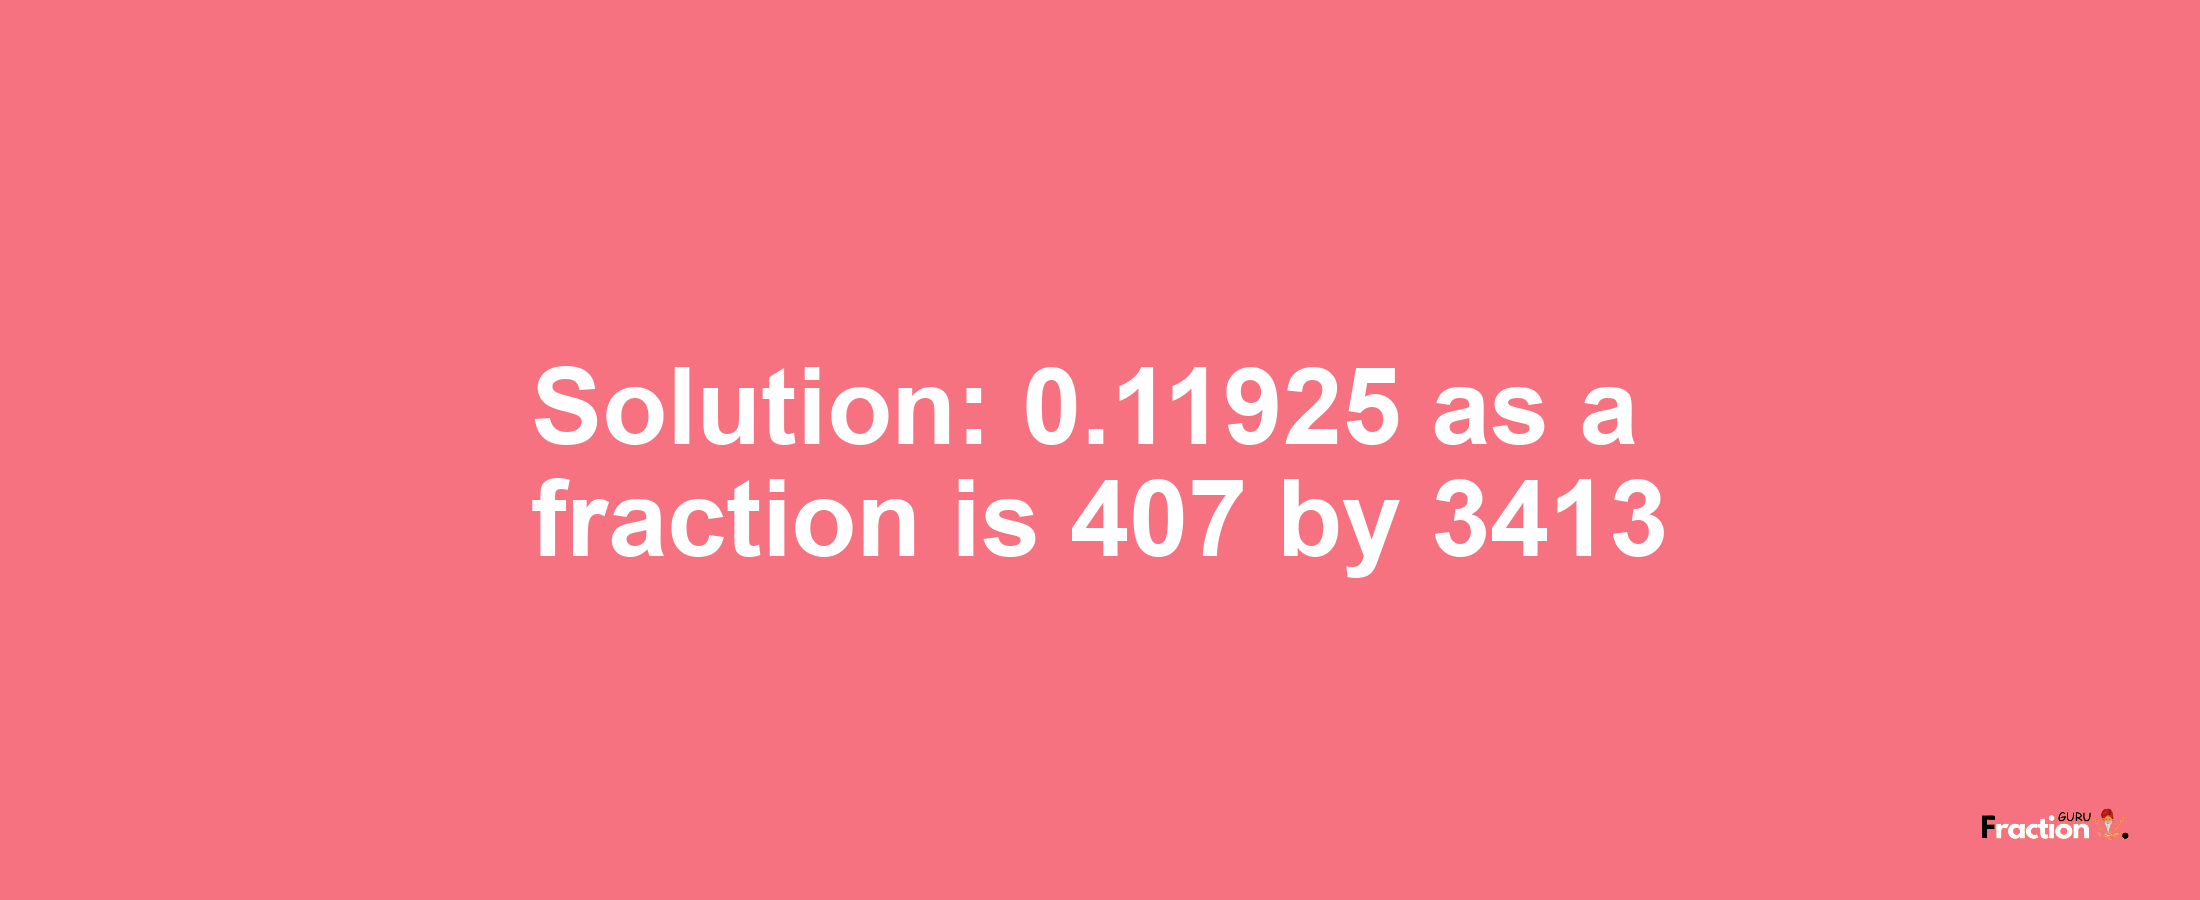 Solution:0.11925 as a fraction is 407/3413